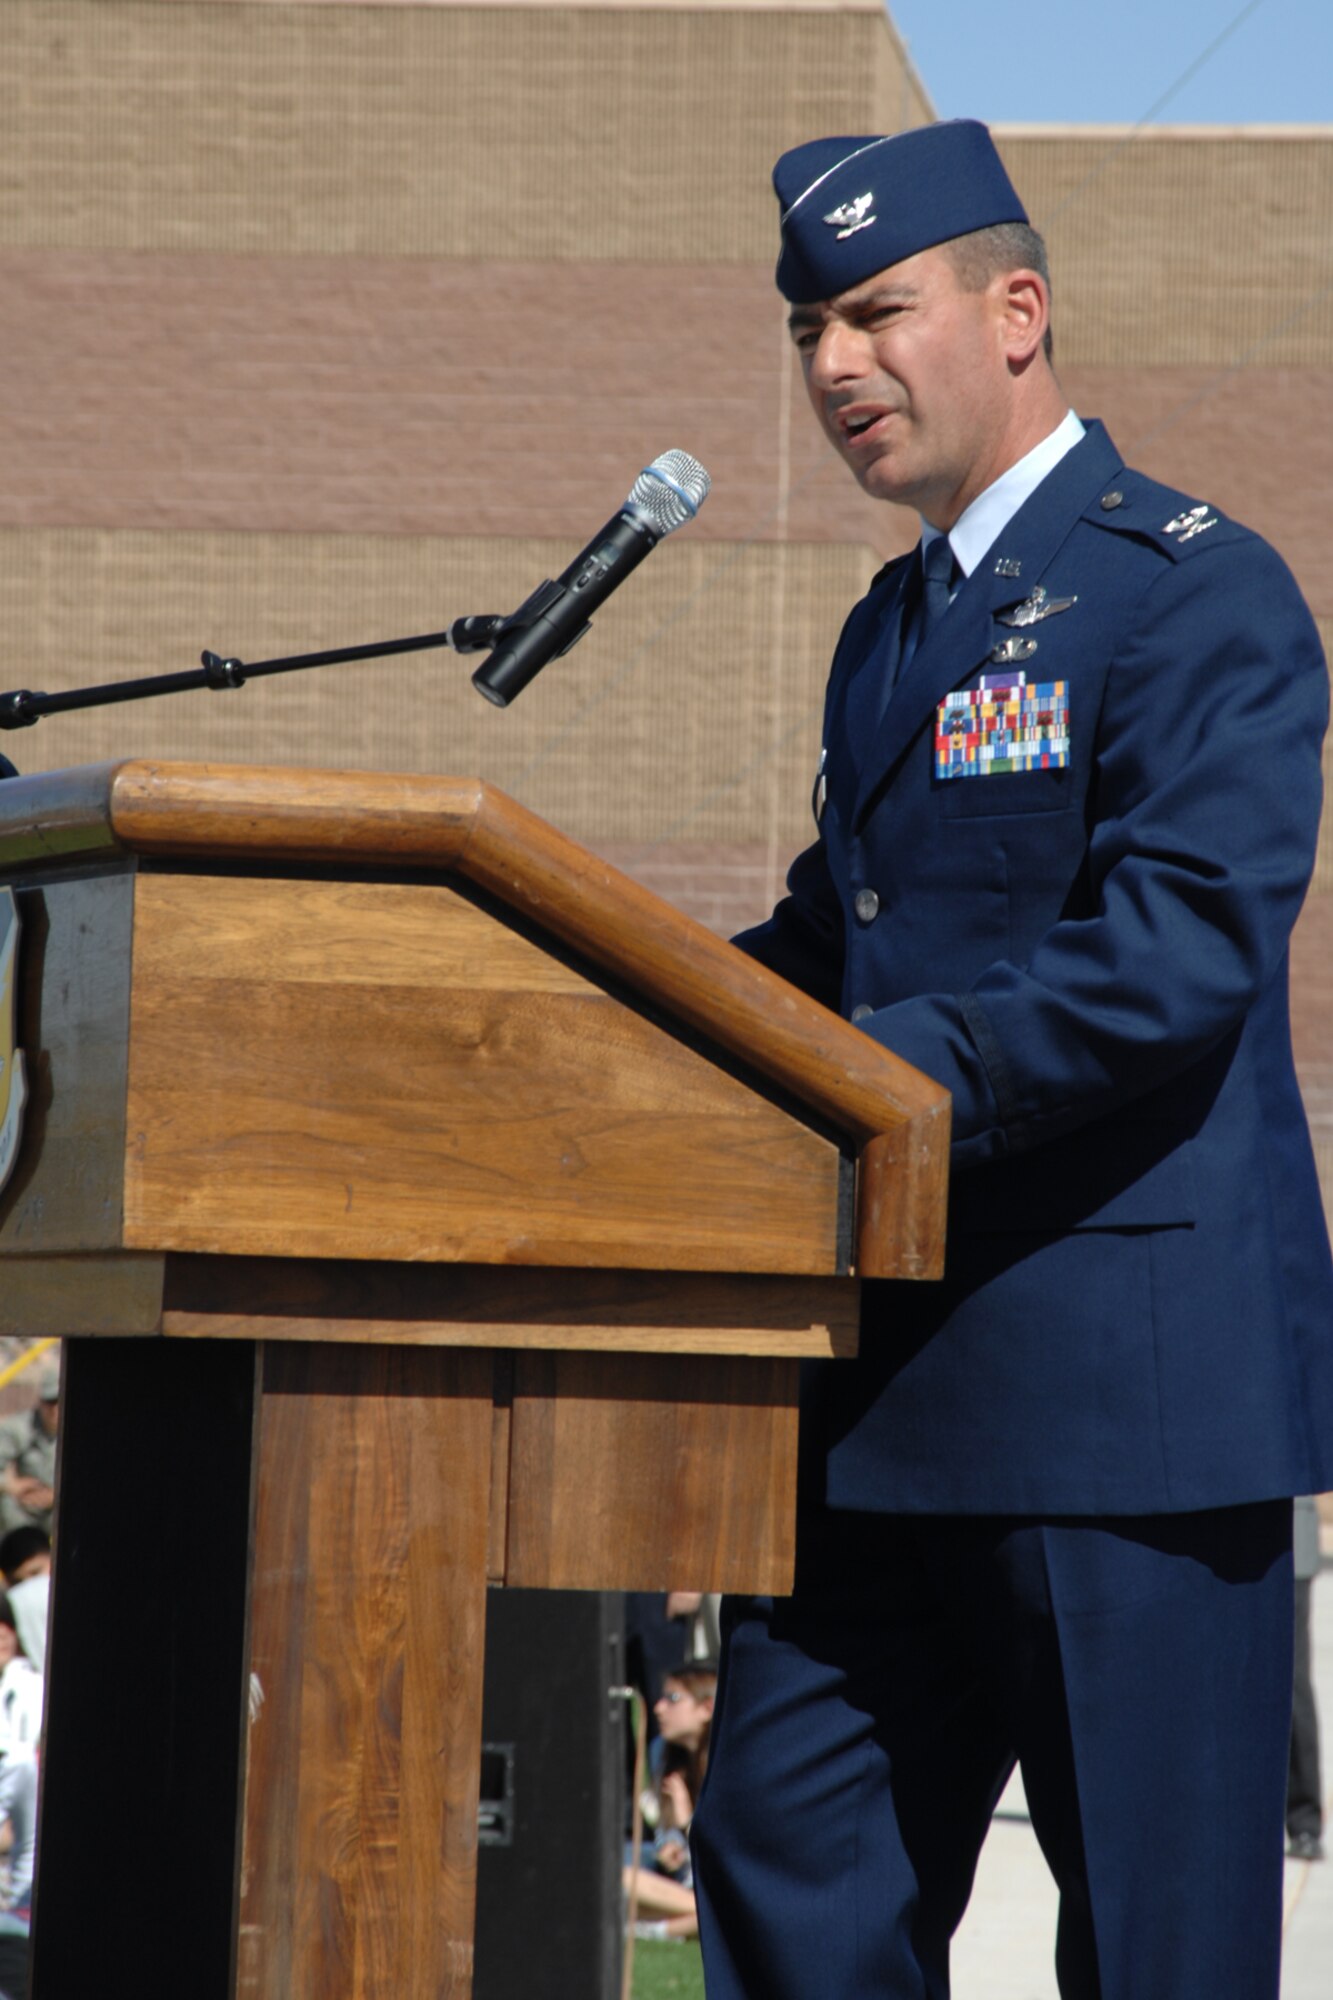 HOLLOMAN AIR FORCE BASE, N.M.--Col. Jeff Harrigian, 49th Fighter Wing commander, gives a speech during the Sunset Stealth F-117A retirement ceremony April 21, 2008, here at Heritage Park. The Sunset Stealth retired the final four F-117s as they flew in formation on their way to Tonopah, Nev., their final resting spot. (U.S. Air Force photo/Airman 1st Class Jamal D. Sutter)